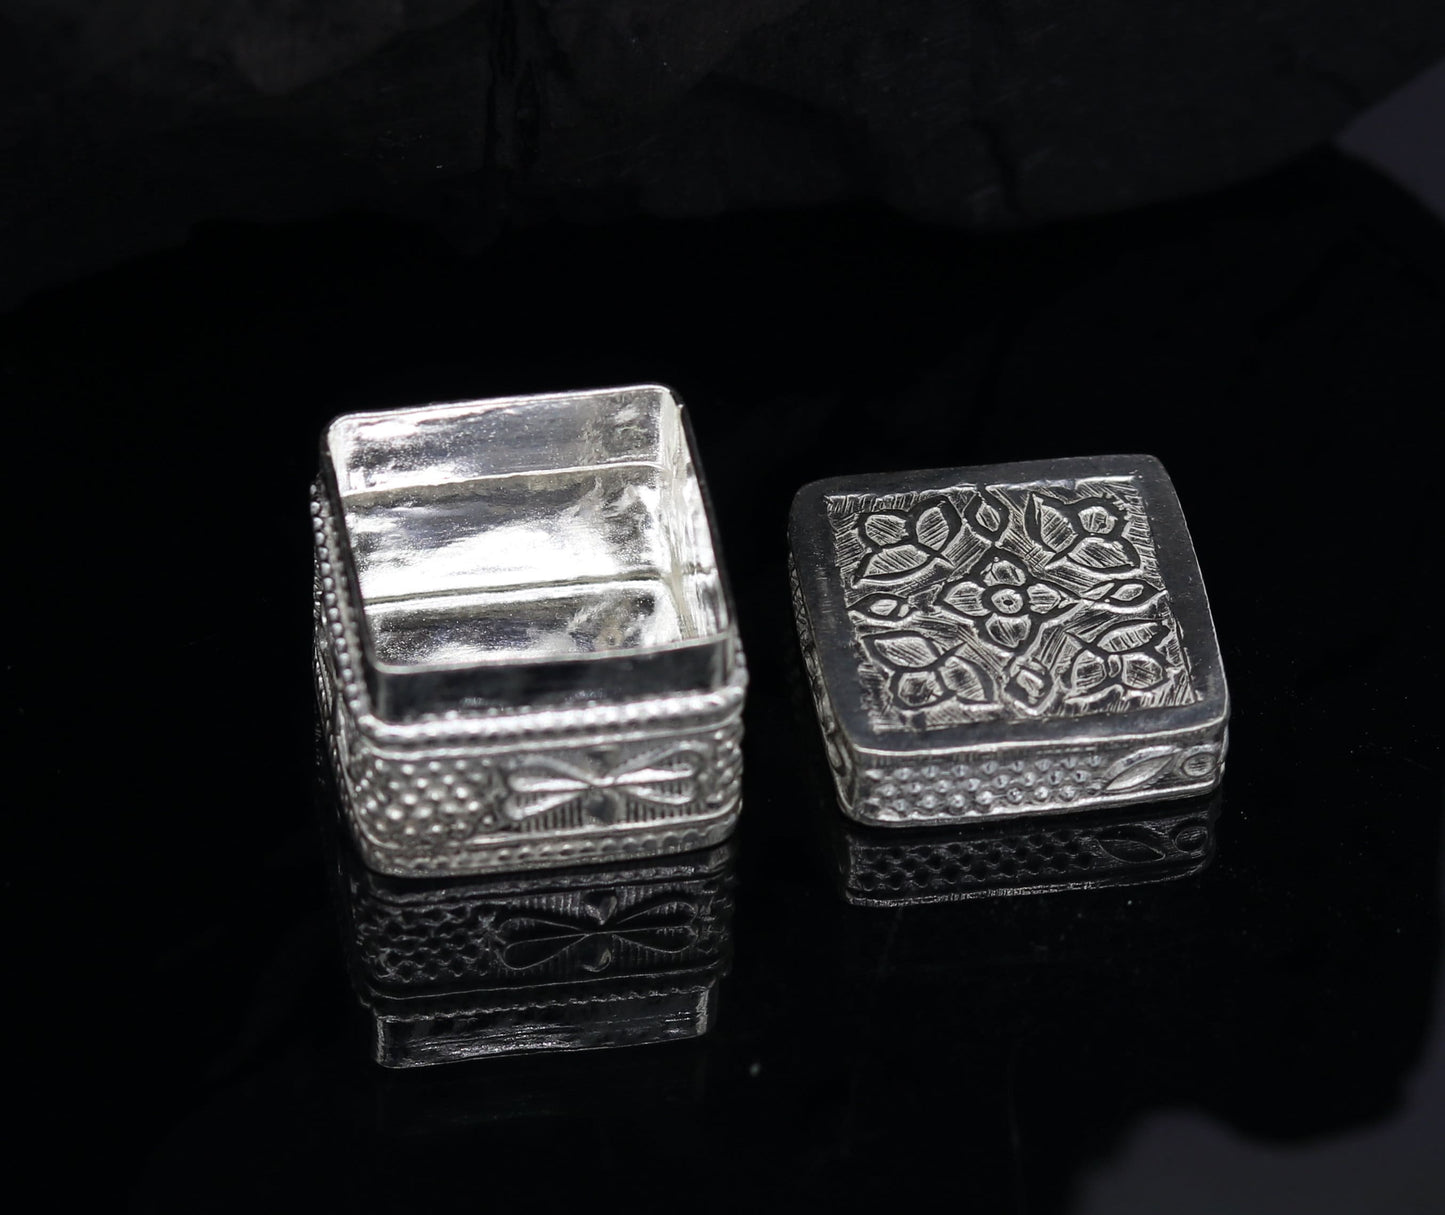 vintage style small bridal queen sterling silver trinket box or eyes kajal box, container box, small jewelry box, bridal art gifting  stb59 - TRIBAL ORNAMENTS